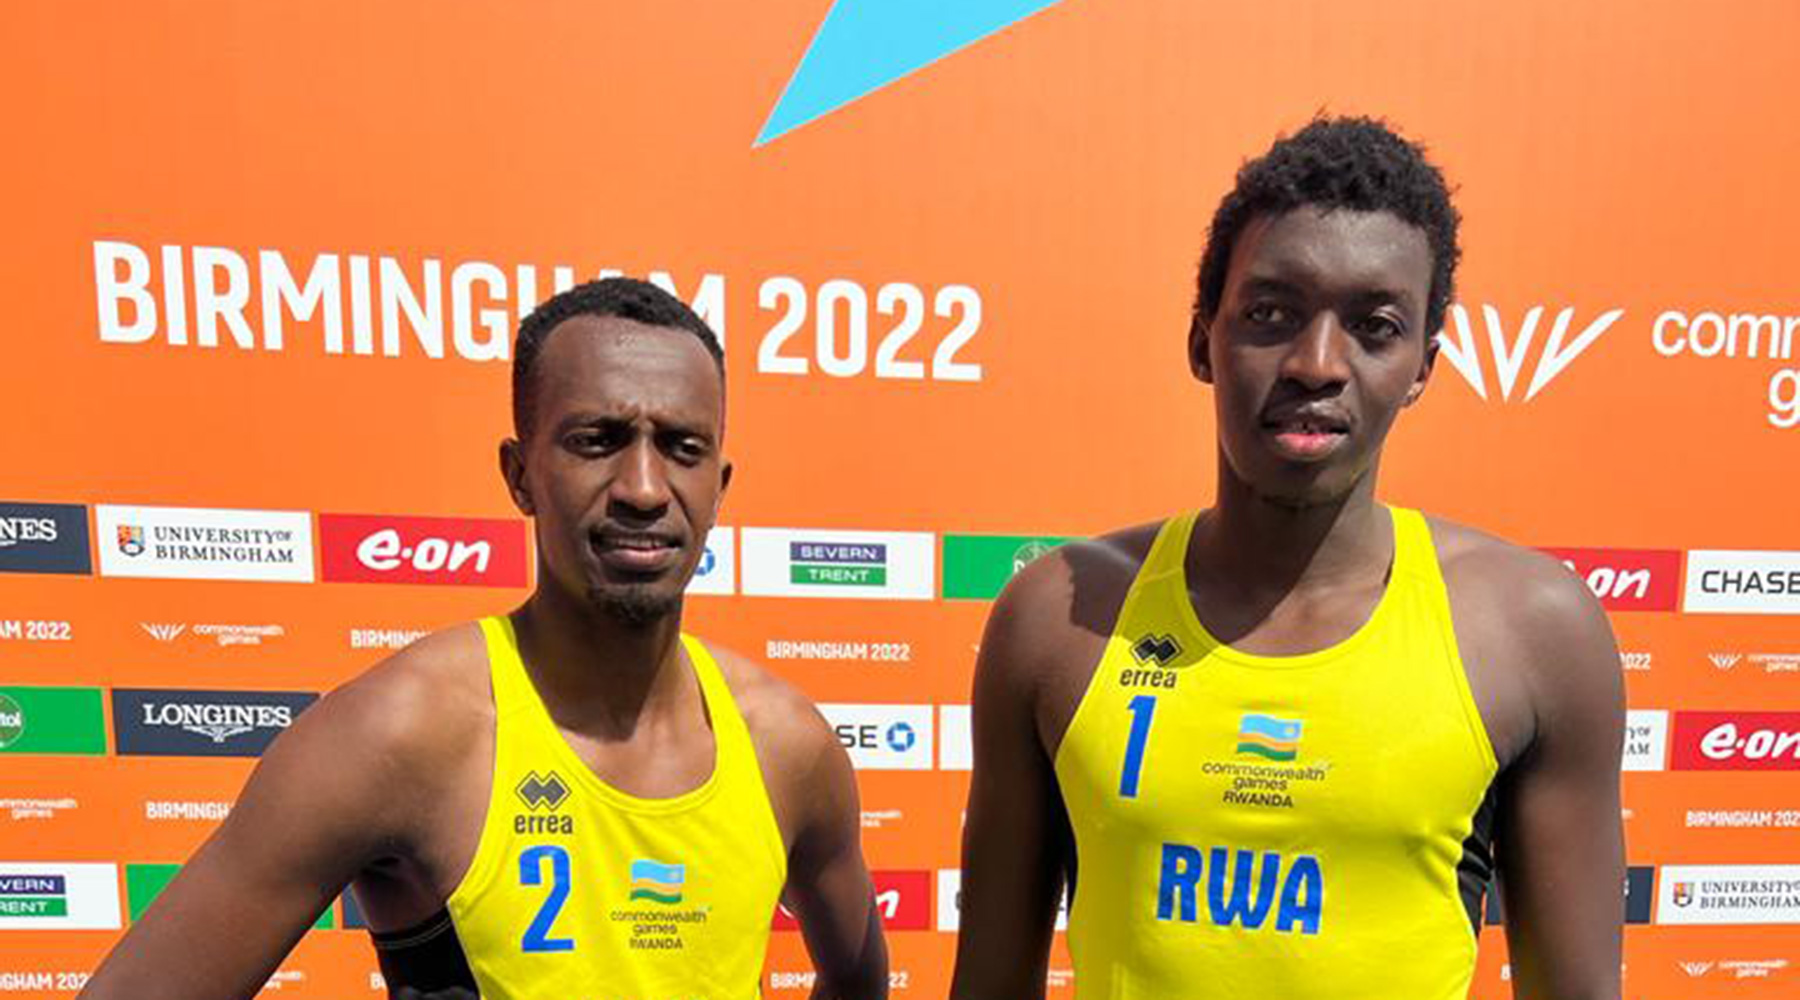 The national beach volleyball team missed out on a bronze medal after losing to England in a third place game on Sunday, August 7 in Birmingham, UK.